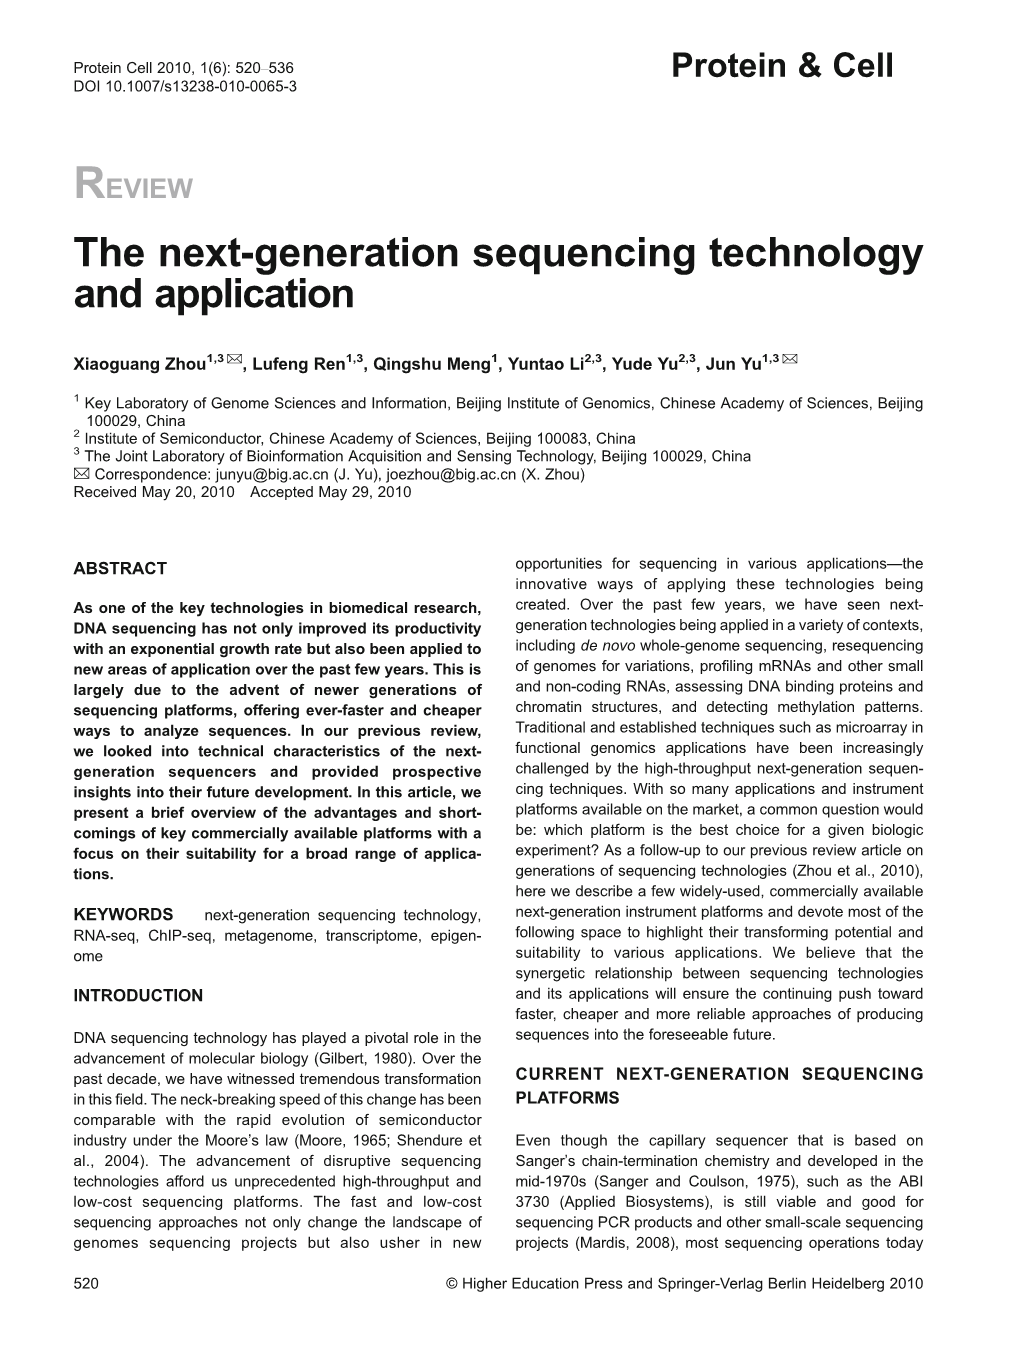 The Next-Generation Sequencing Technology and Application